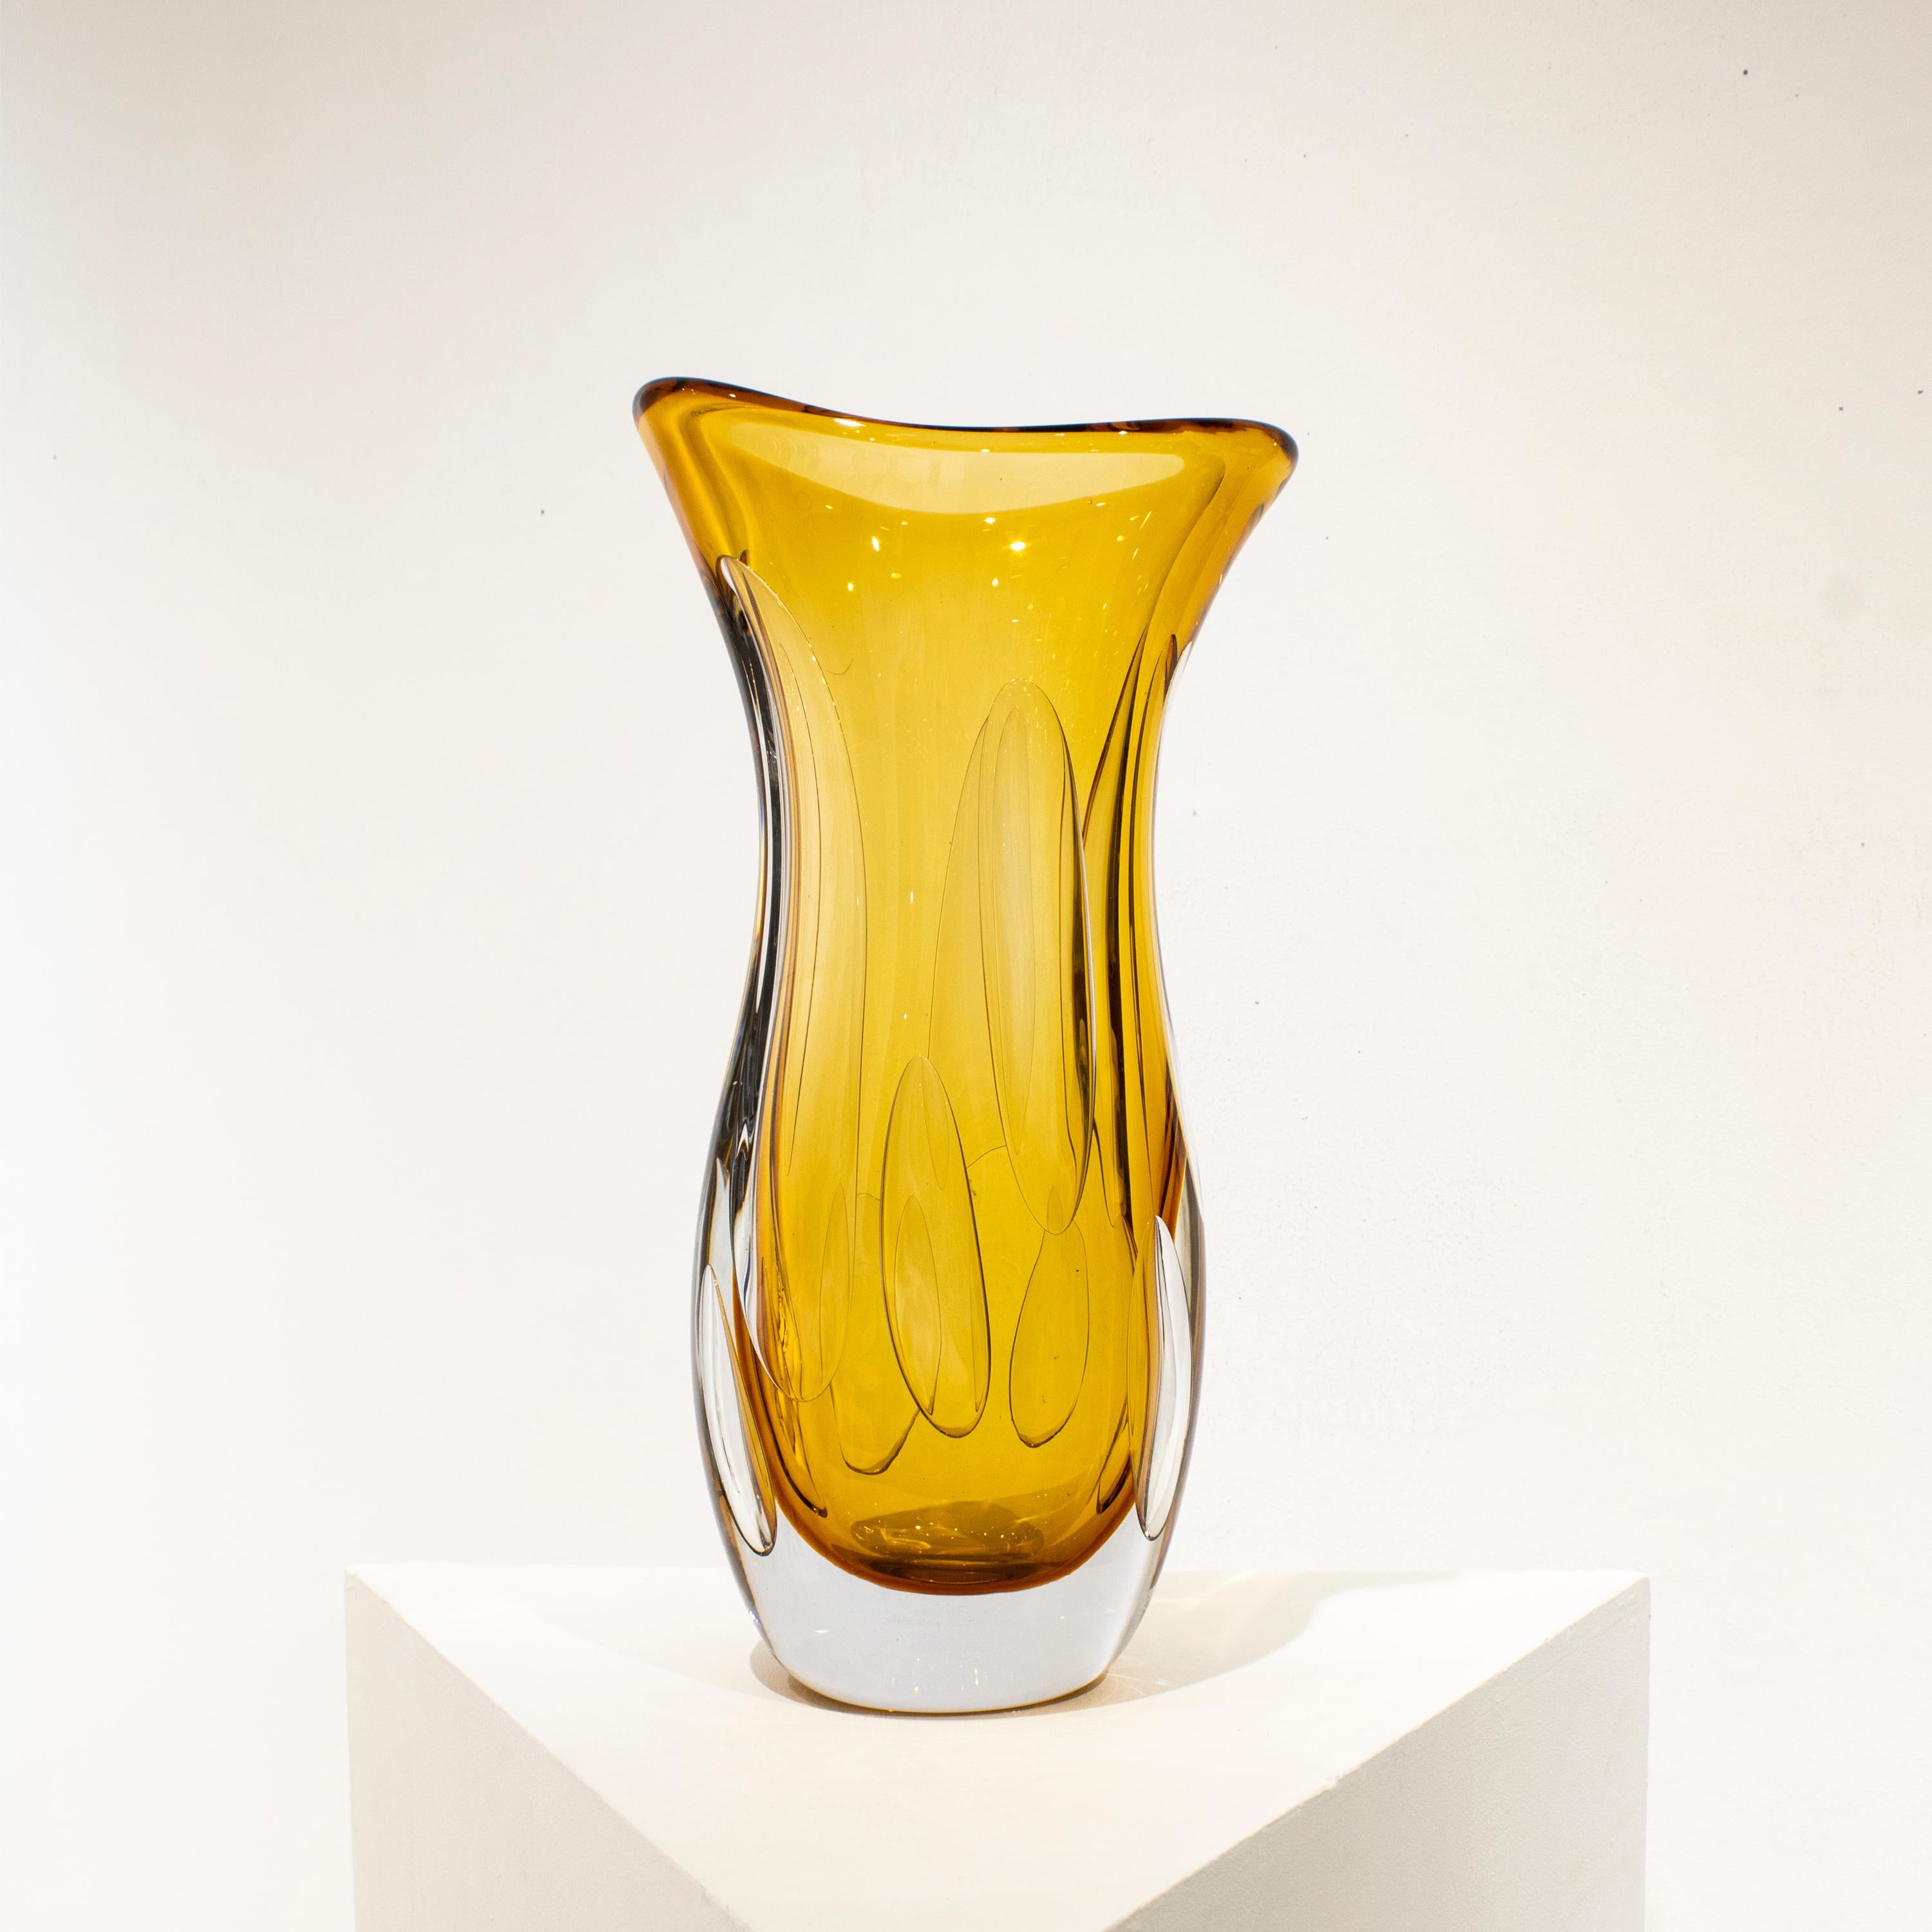 Hand-blown Italian yellow semi-transparent glass vase, with organic shapes and inside bubbles.